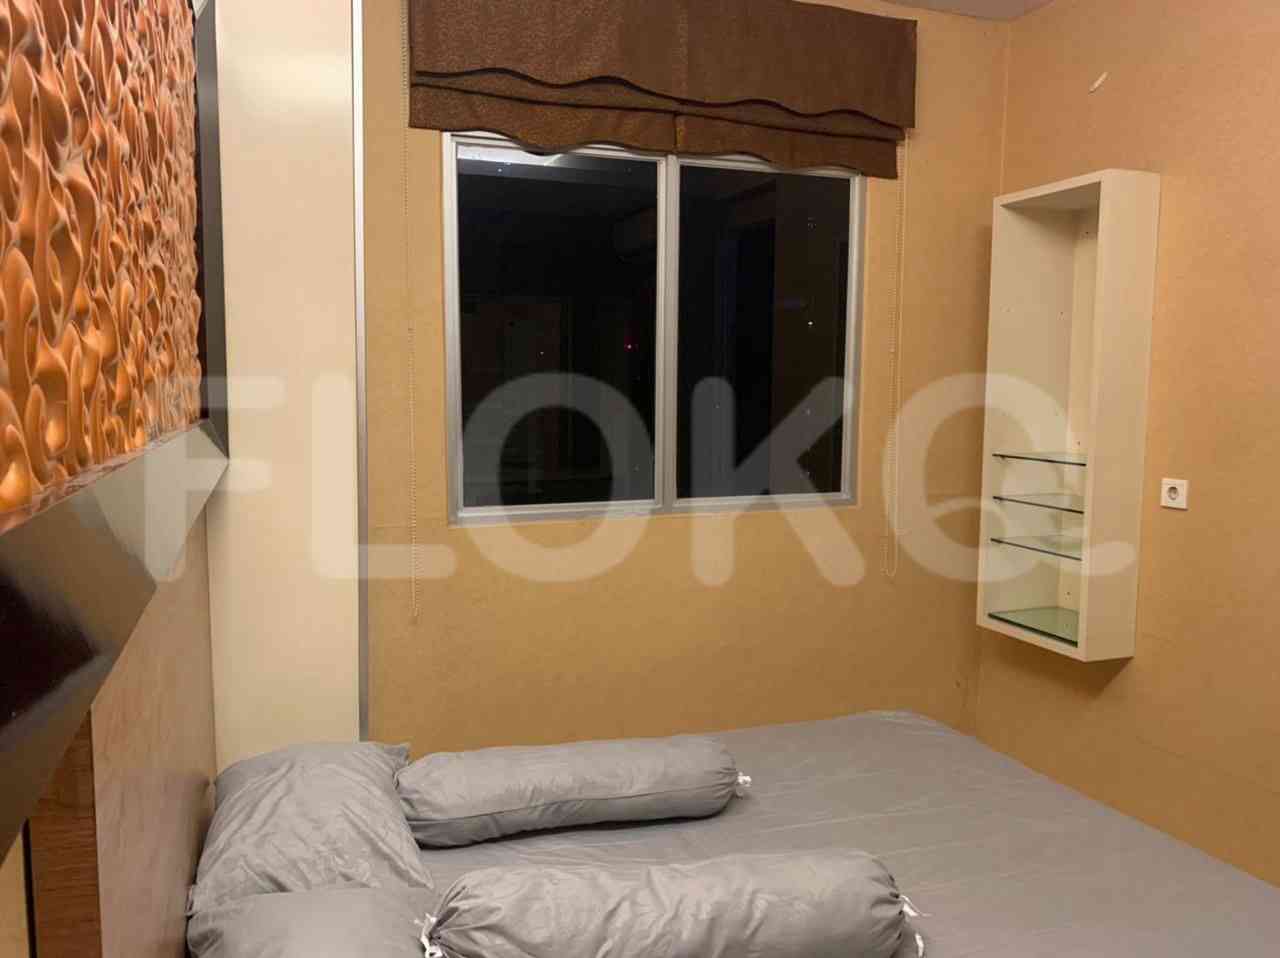 1 Bedroom on 6th Floor for Rent in Kuningan Place Apartment - fkued1 3